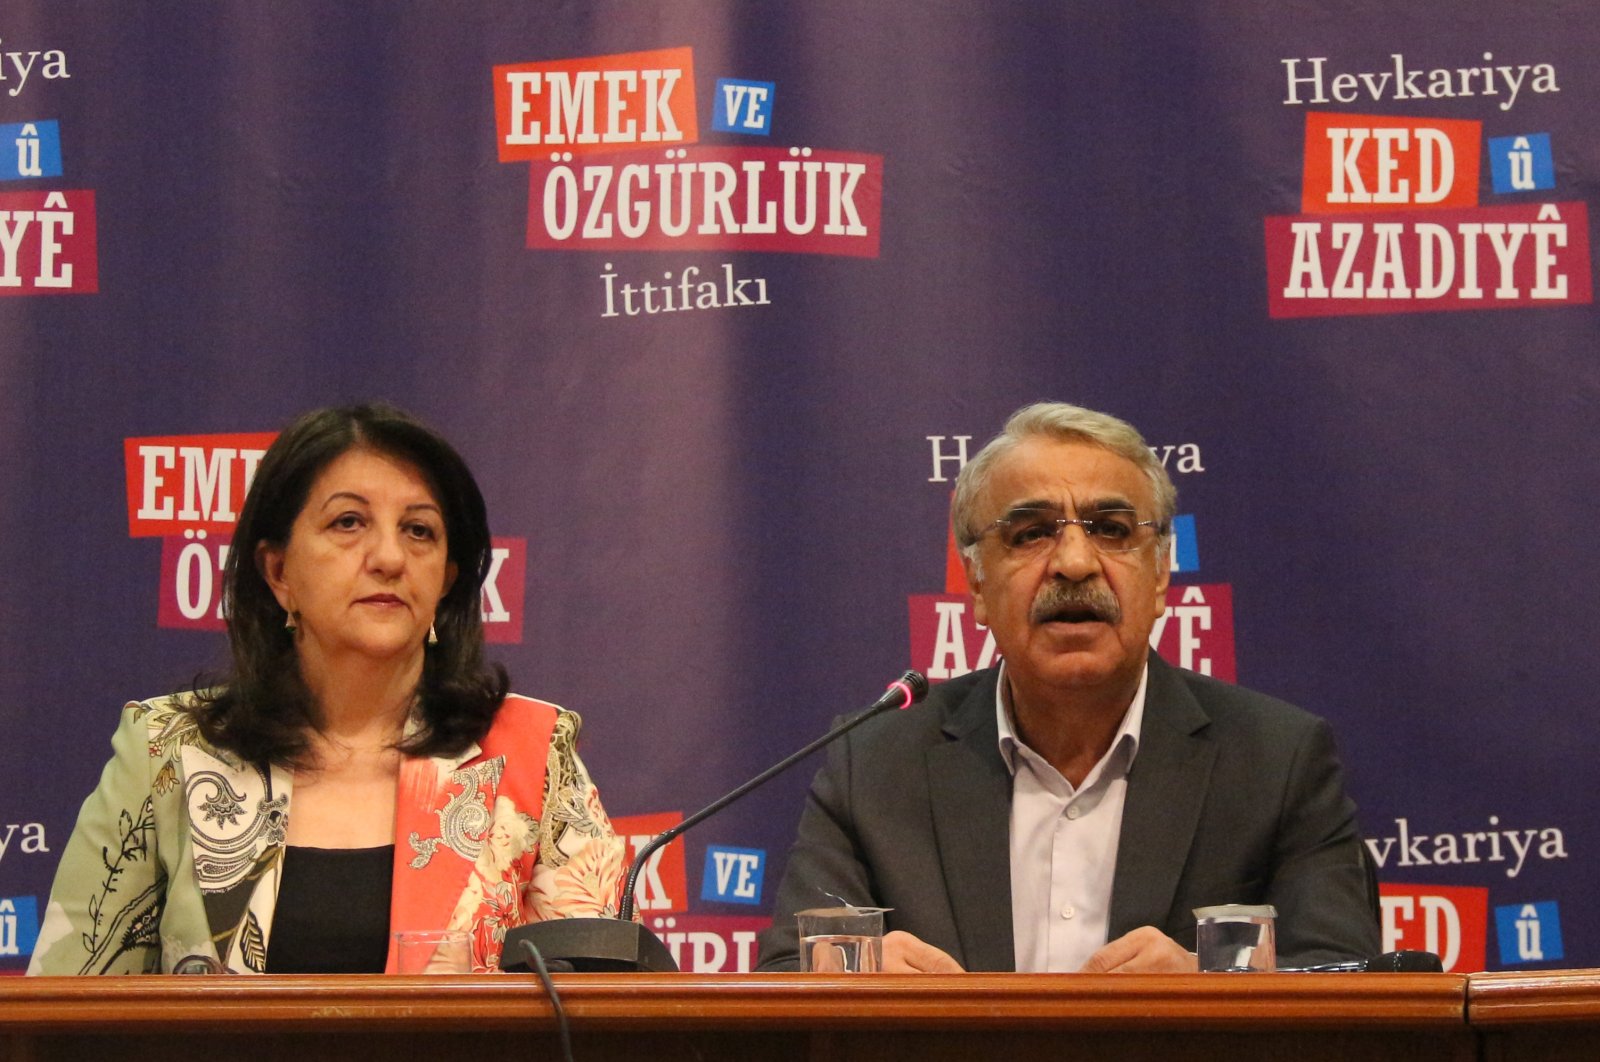 The Peoples’ Democratic Party (HDP) co-Chairs Pervin Buldan (L) and Mithat Sancar (R) hold a press conference at the World Trade Center in Istanbul, Türkiye, March 22, 2023. (AA Photo)